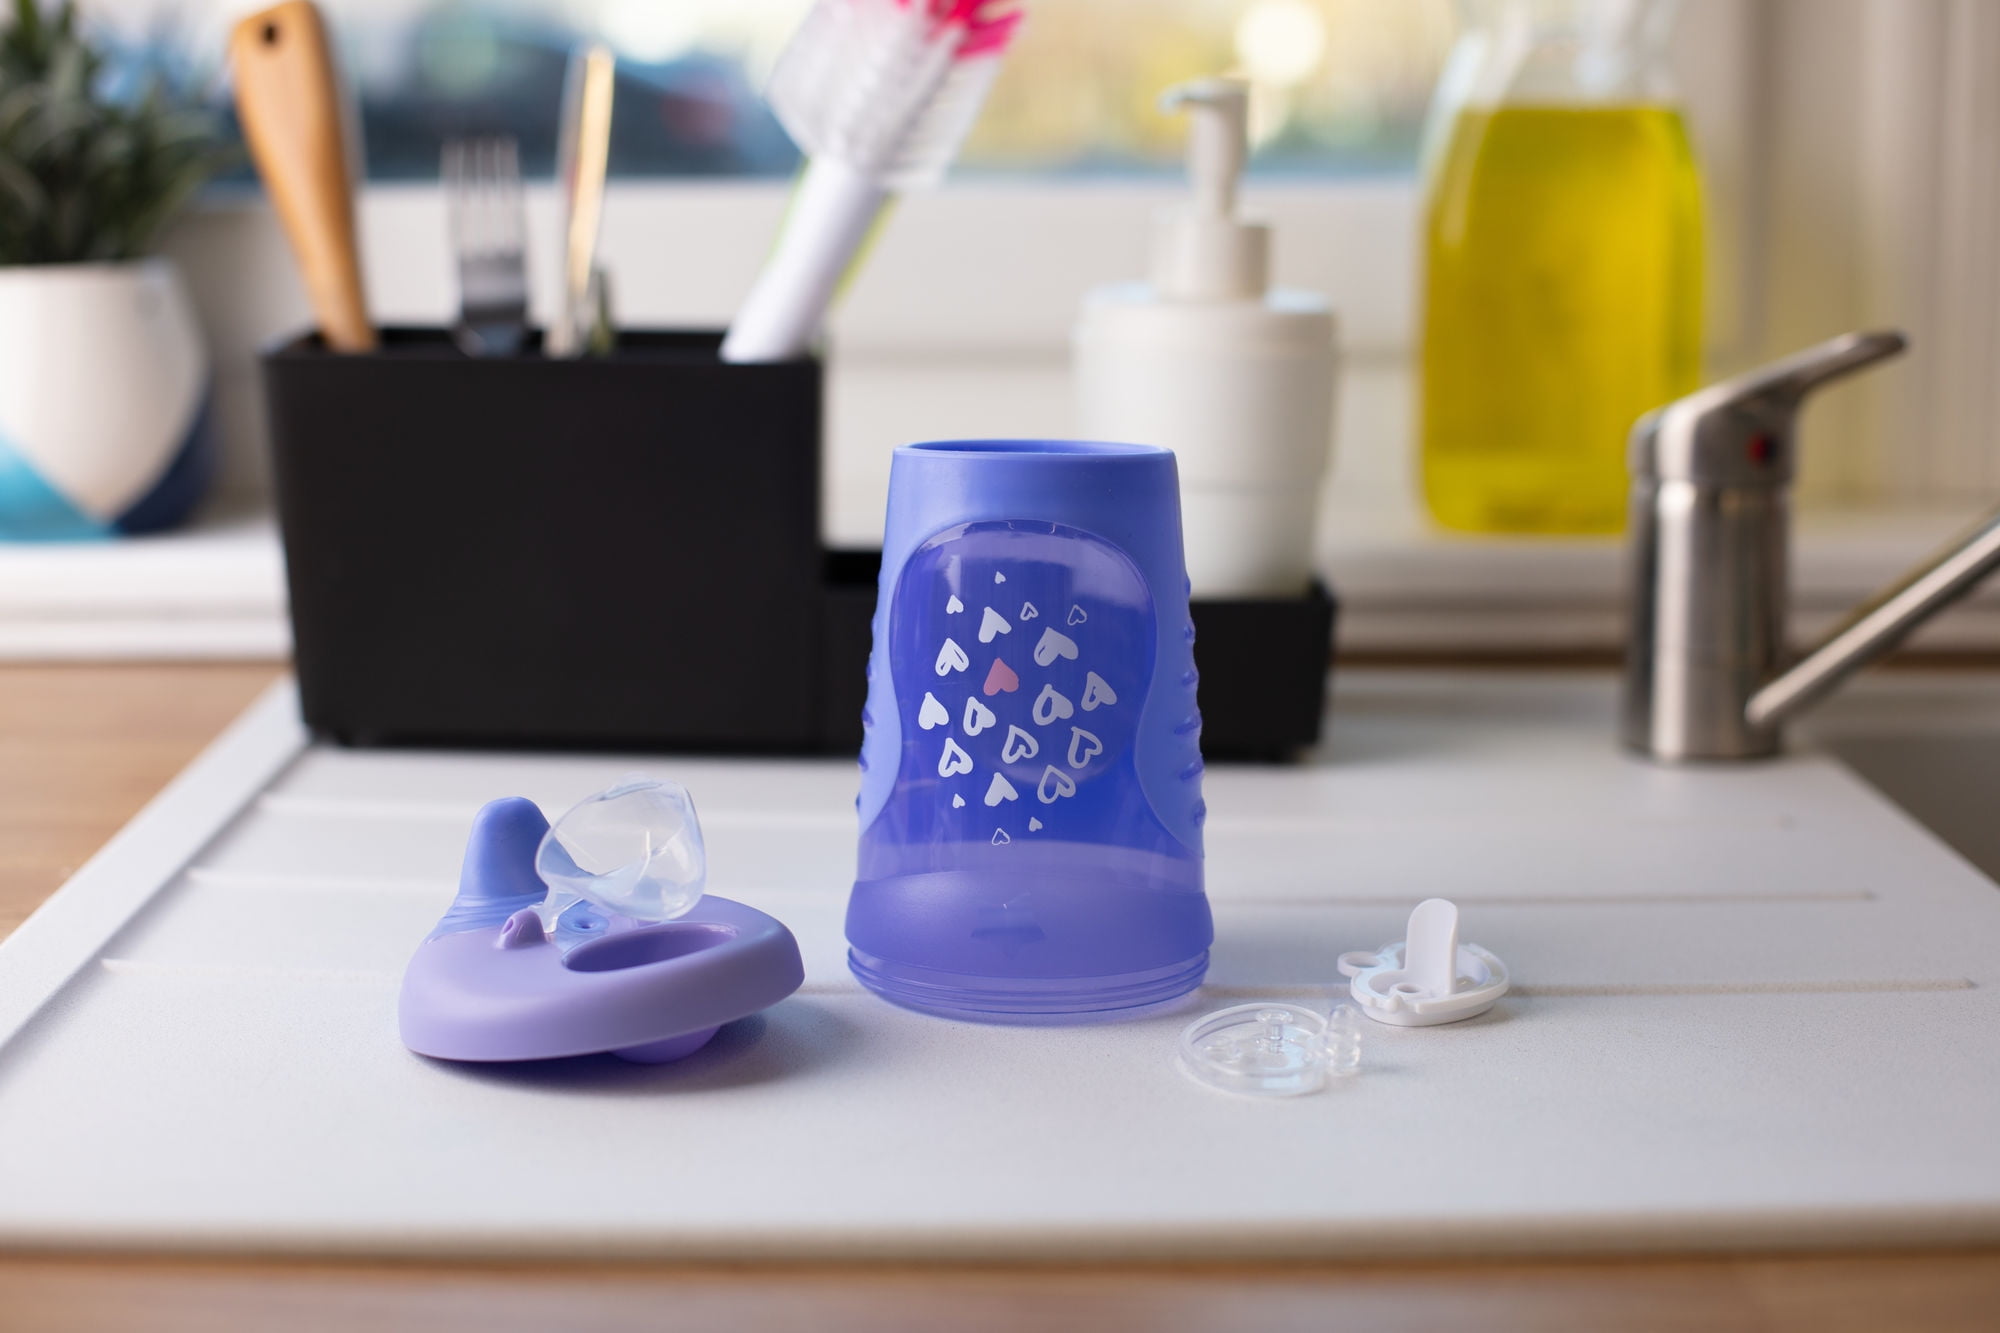 Tommee Tippee Hold Tight Baby Sippy Cup, Spill-Proof